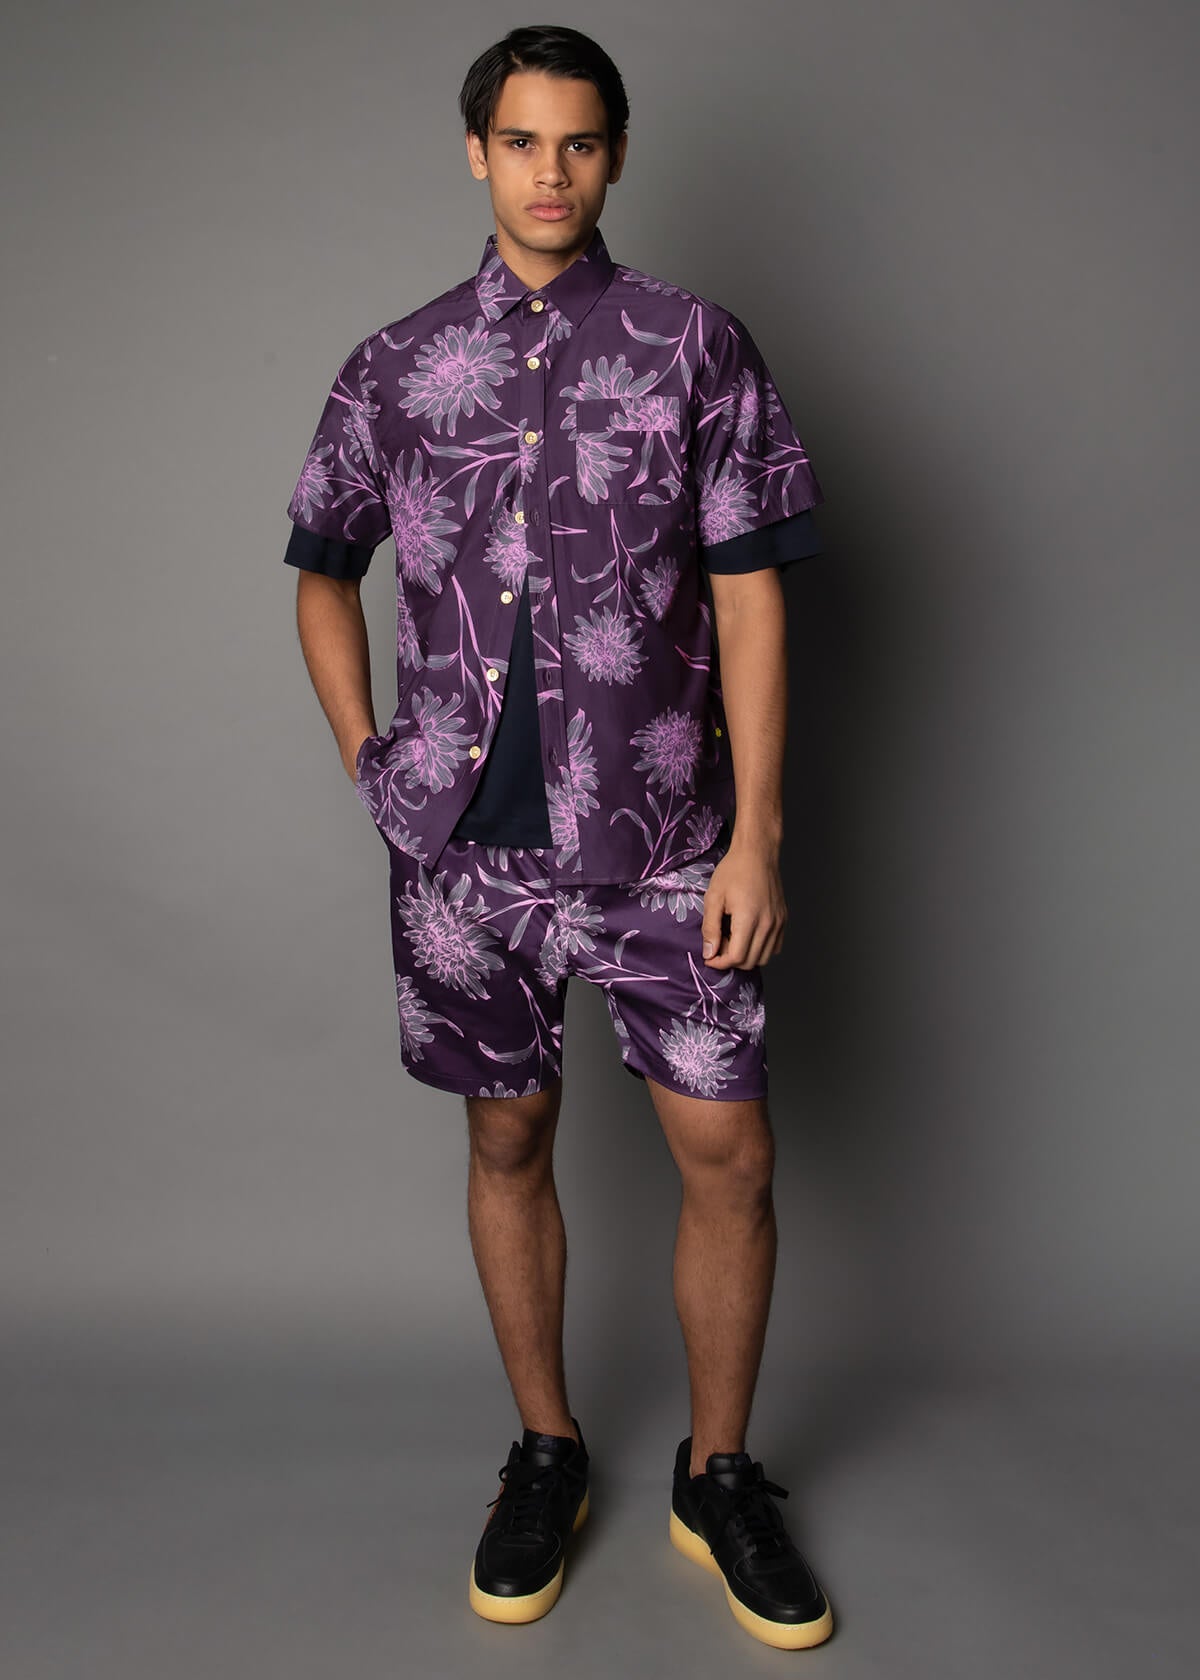 short sleeve purple mens shirt with a floral print